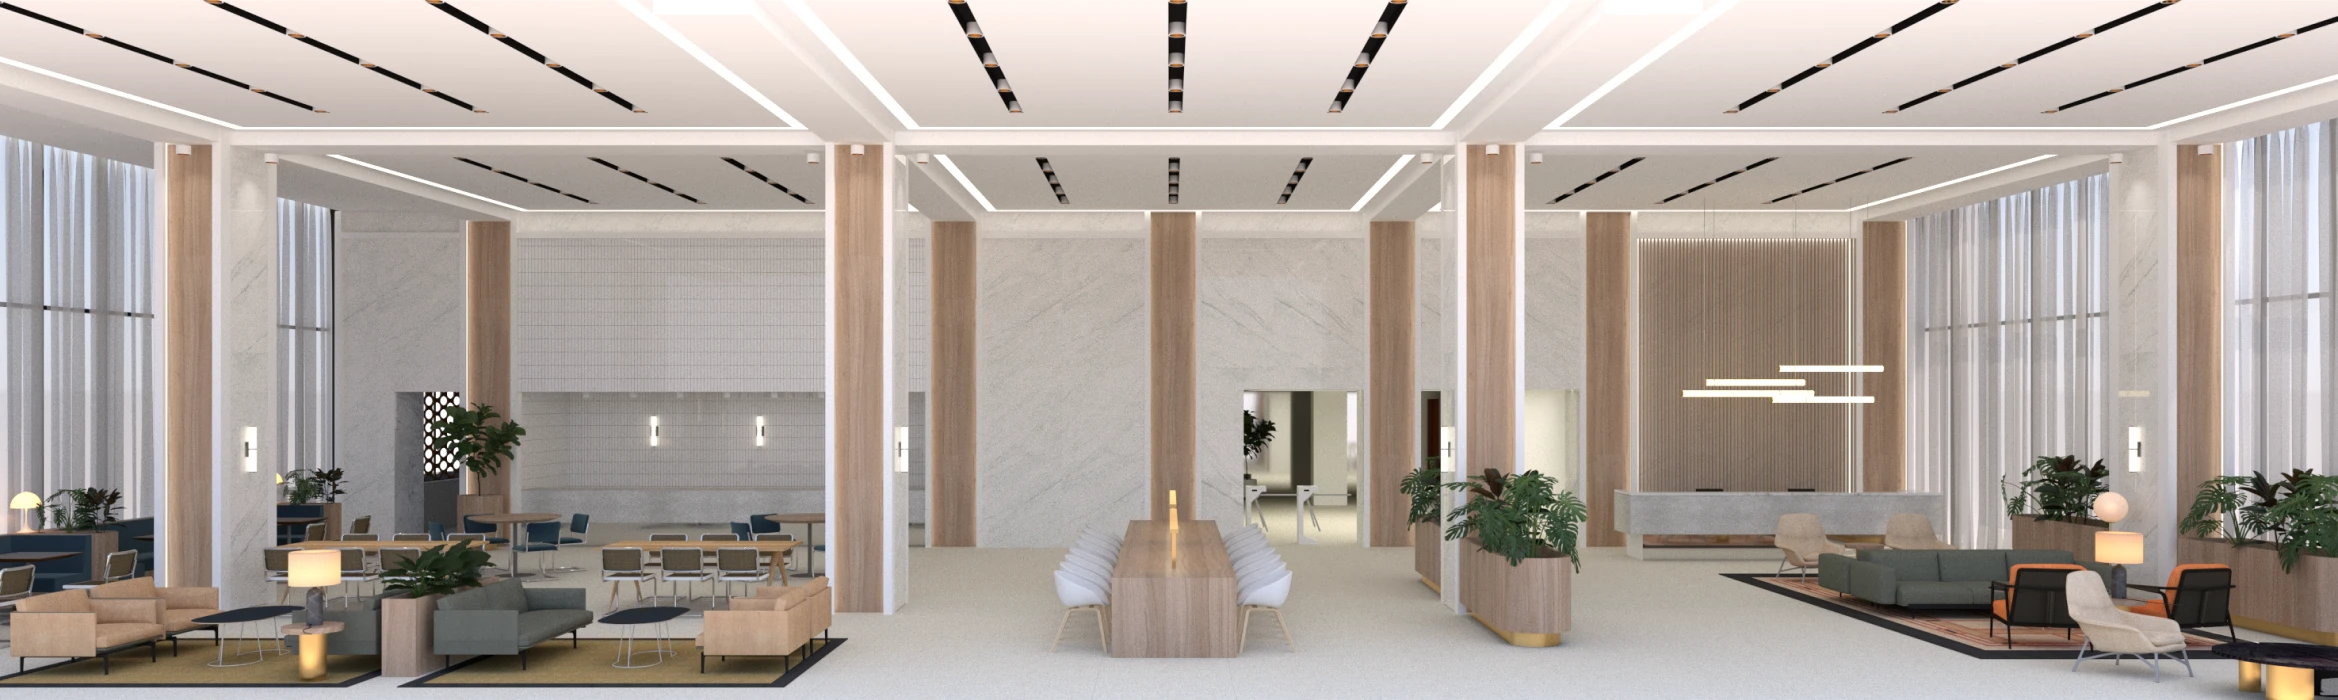 A luxurious reception and an organic cafe on the ground floor at OP Tower shown via image published on OP Tower blog page.